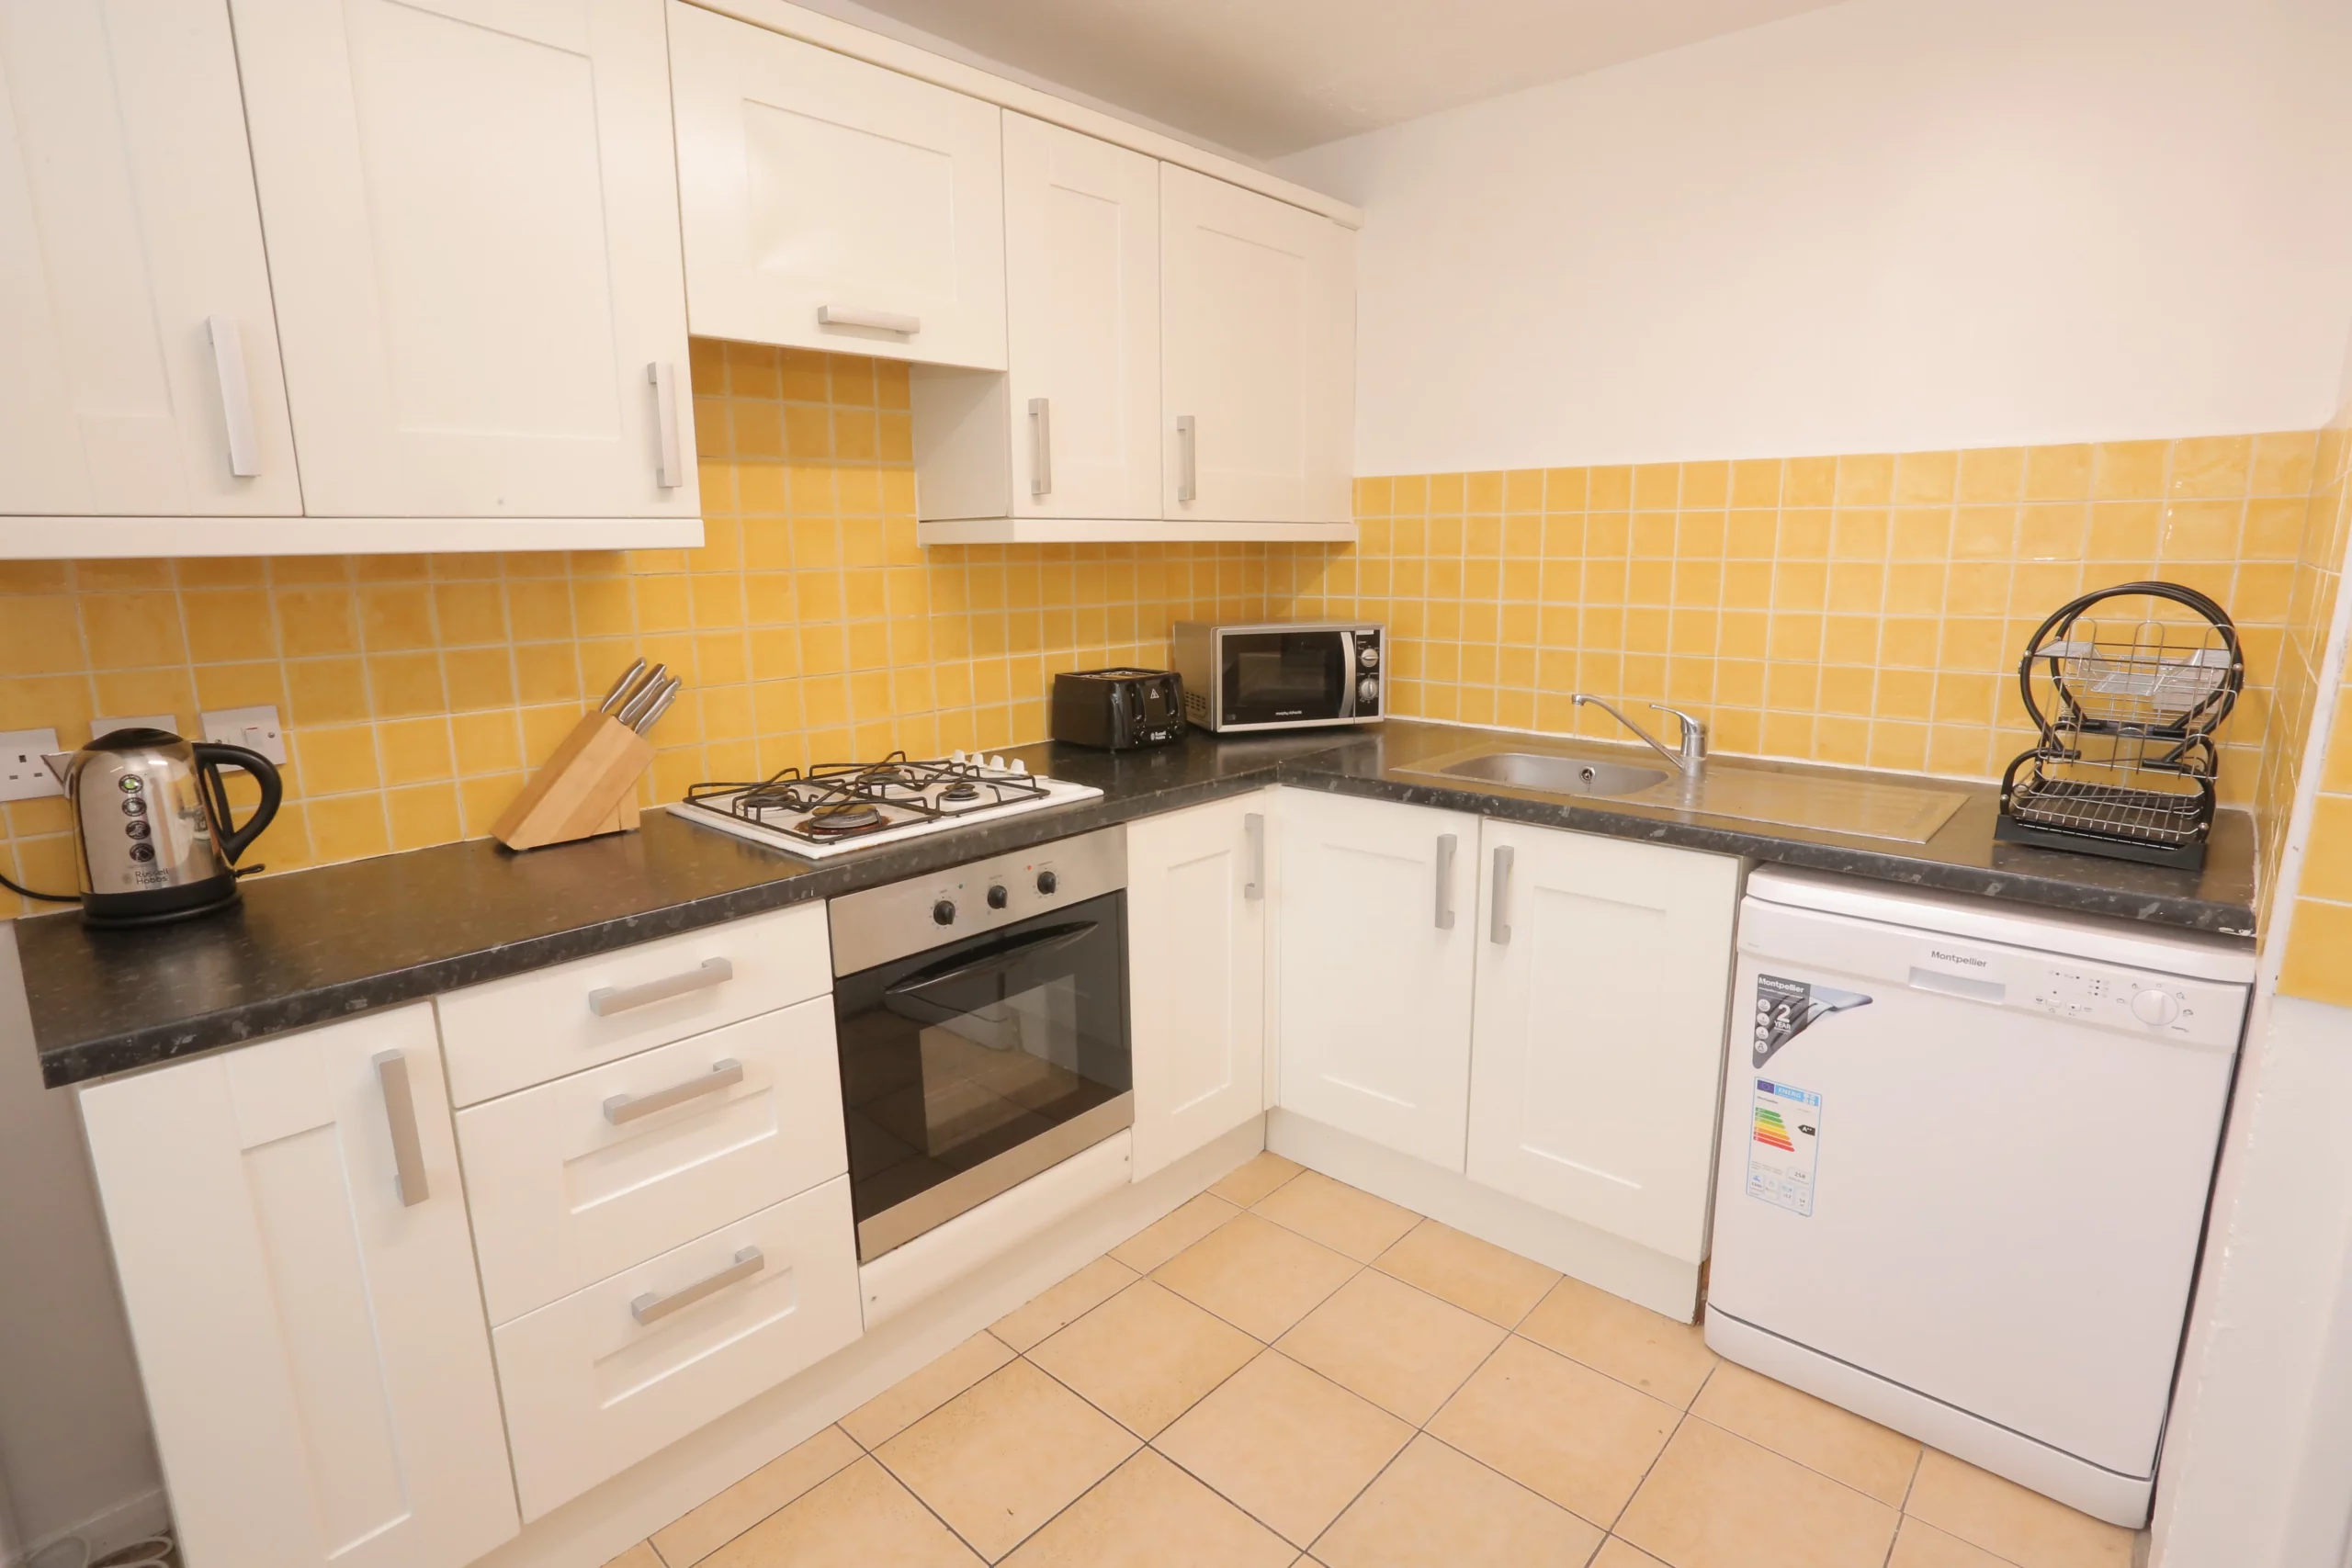 Three Bedroom Flat located in Mile End